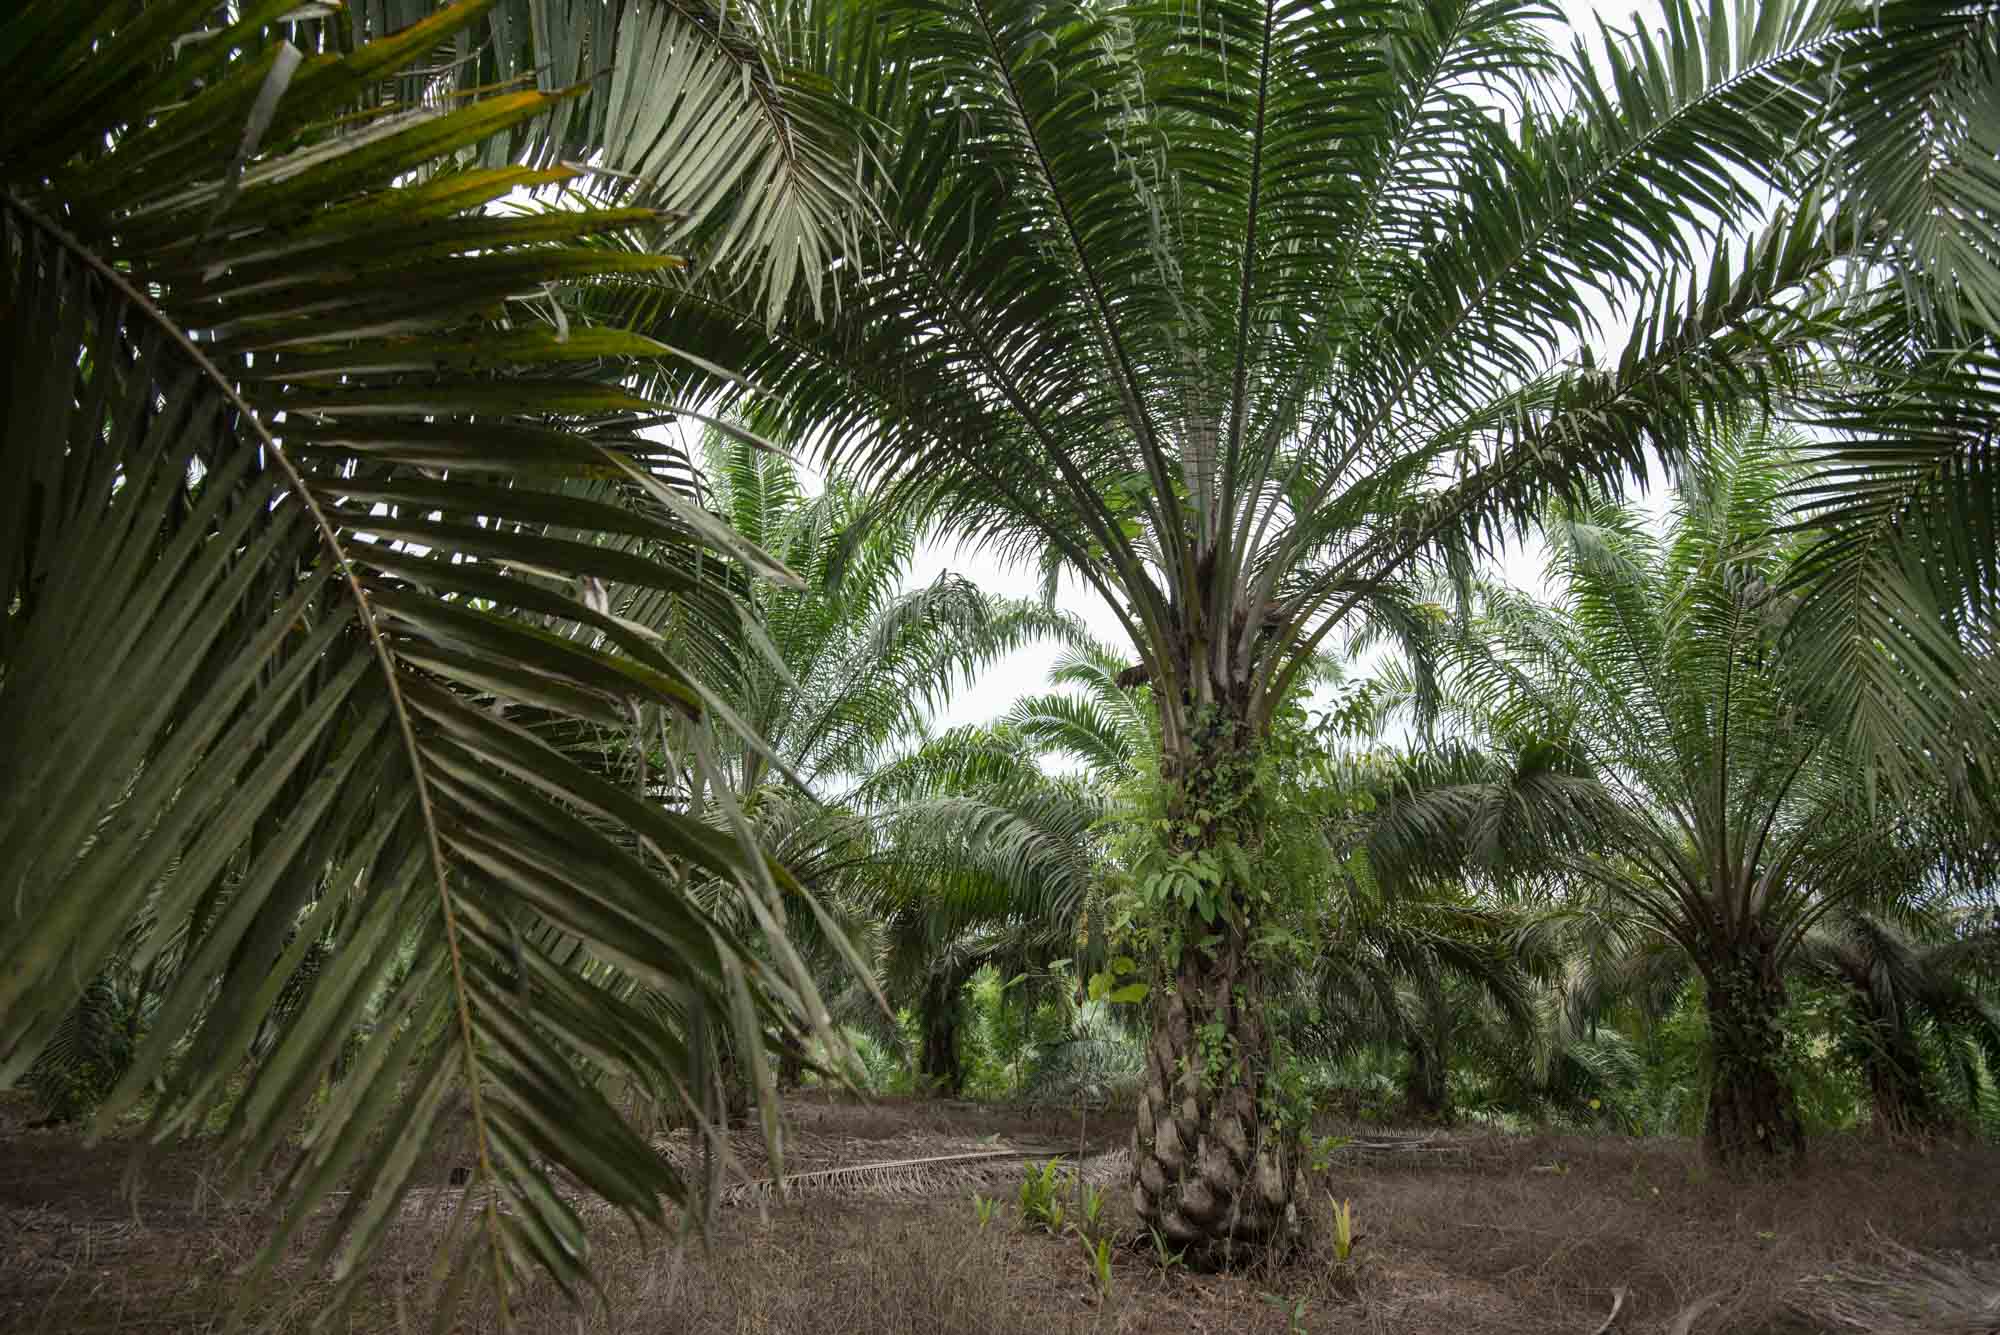 Borneo's Vanishing Forests: African Oil Palms | Pulitzer Center